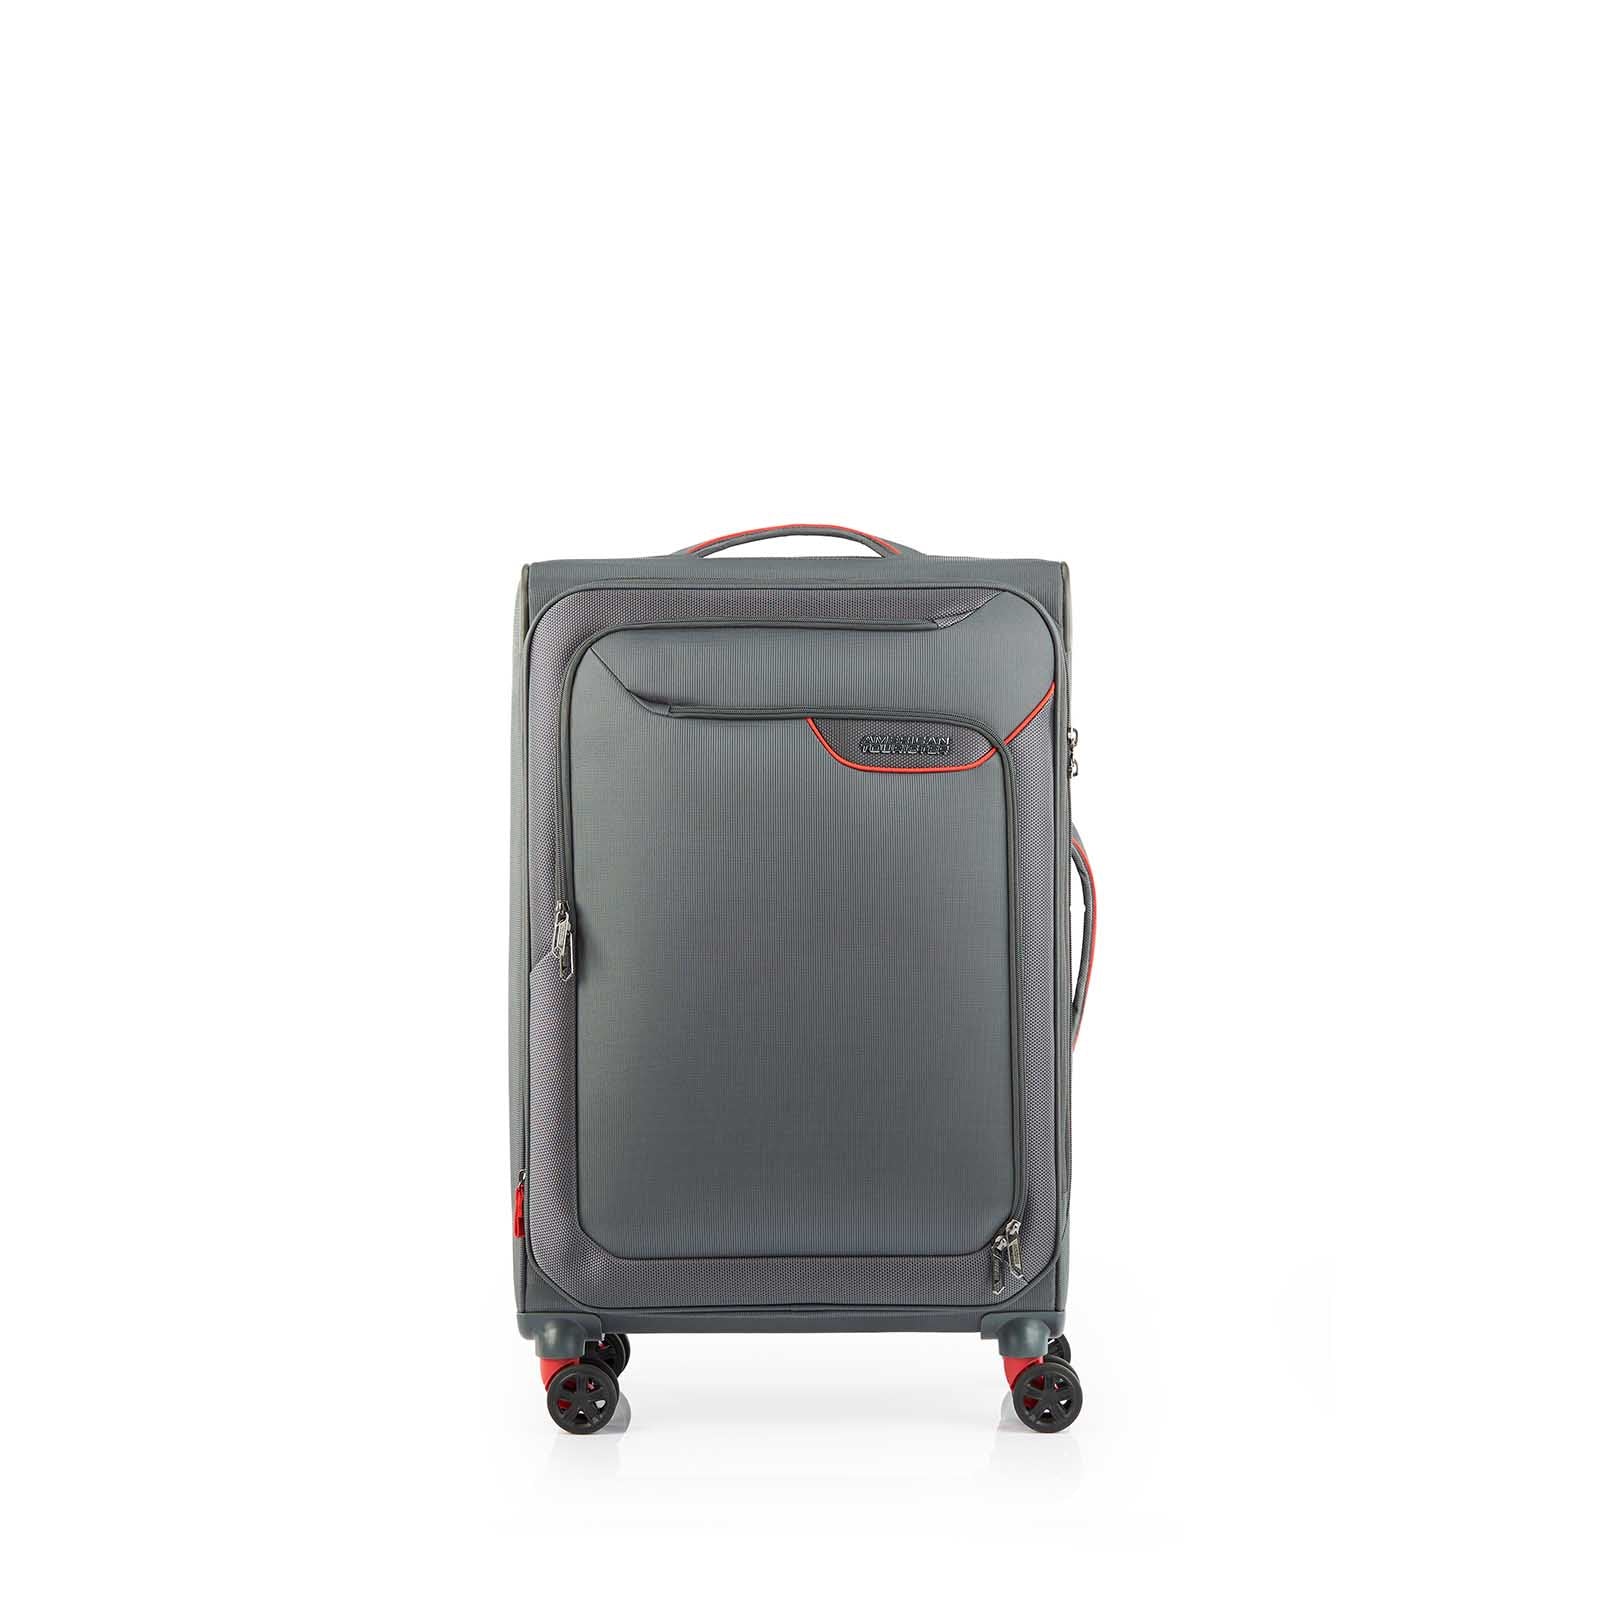 American-Tourister-Applite-4-Eco-71cm-Suitcase-Grey-Red-Front